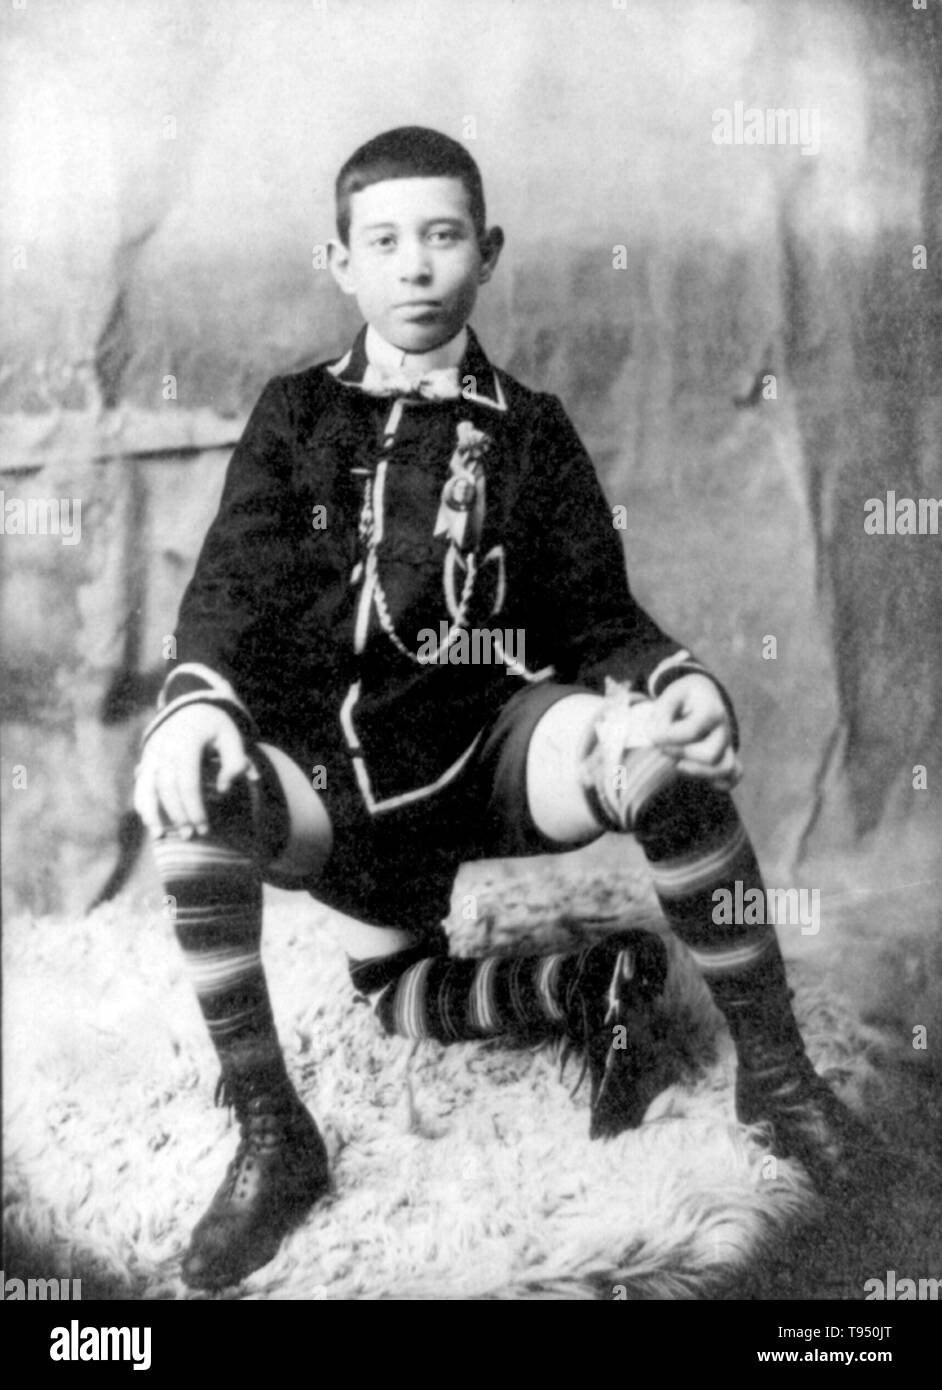 Francesco Lentini (July 8, 1884 - September 22, 1966) was an Italian-American showman. He was born with a parasitic twin. The twin was attached to Lentini's body at the base of his spine and consisted of a pelvis bone, a rudimentary set of male genitalia and a full-sized leg extending from the right side of Lentini's hip, with a small foot protruding from its knee. At the age of 8, his family moved to the United States, where he entered the sideshow business as The Great Lentini. Stock Photo